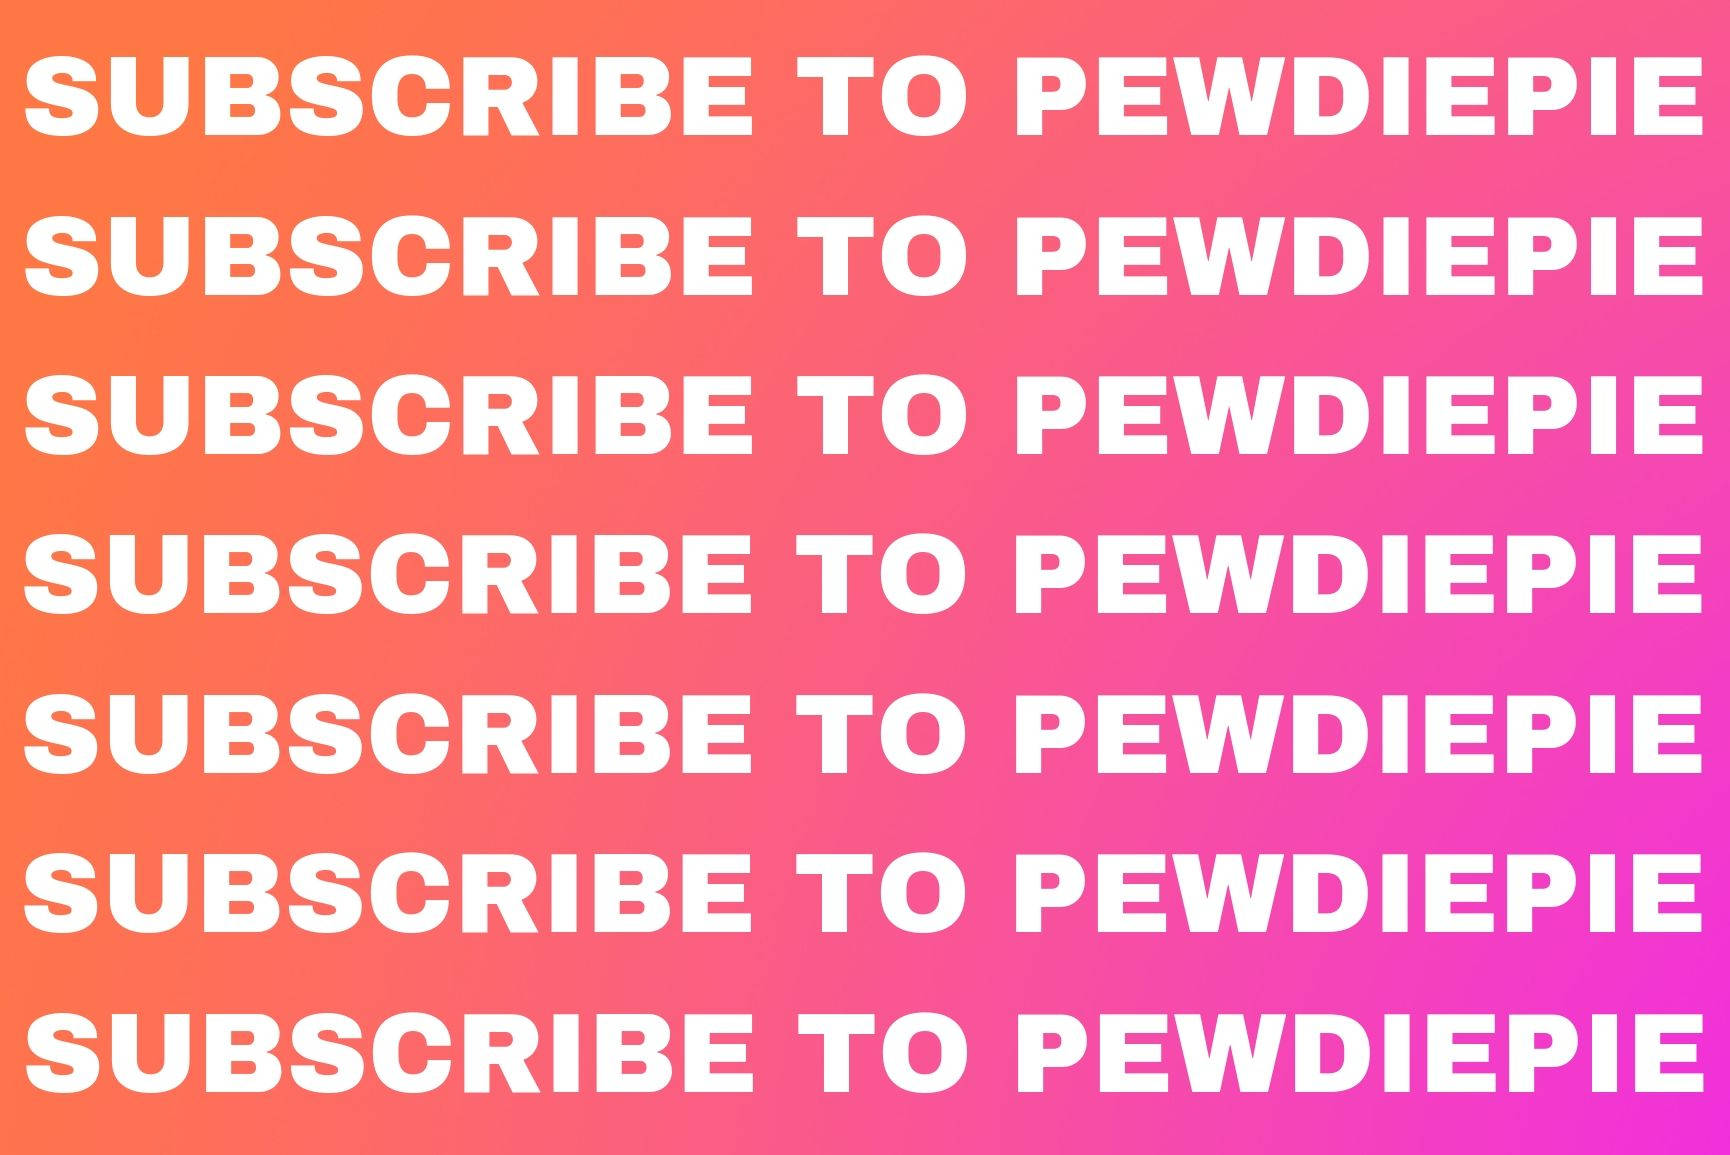 Subscribe To Pewdiepie Pattern Wallpaper